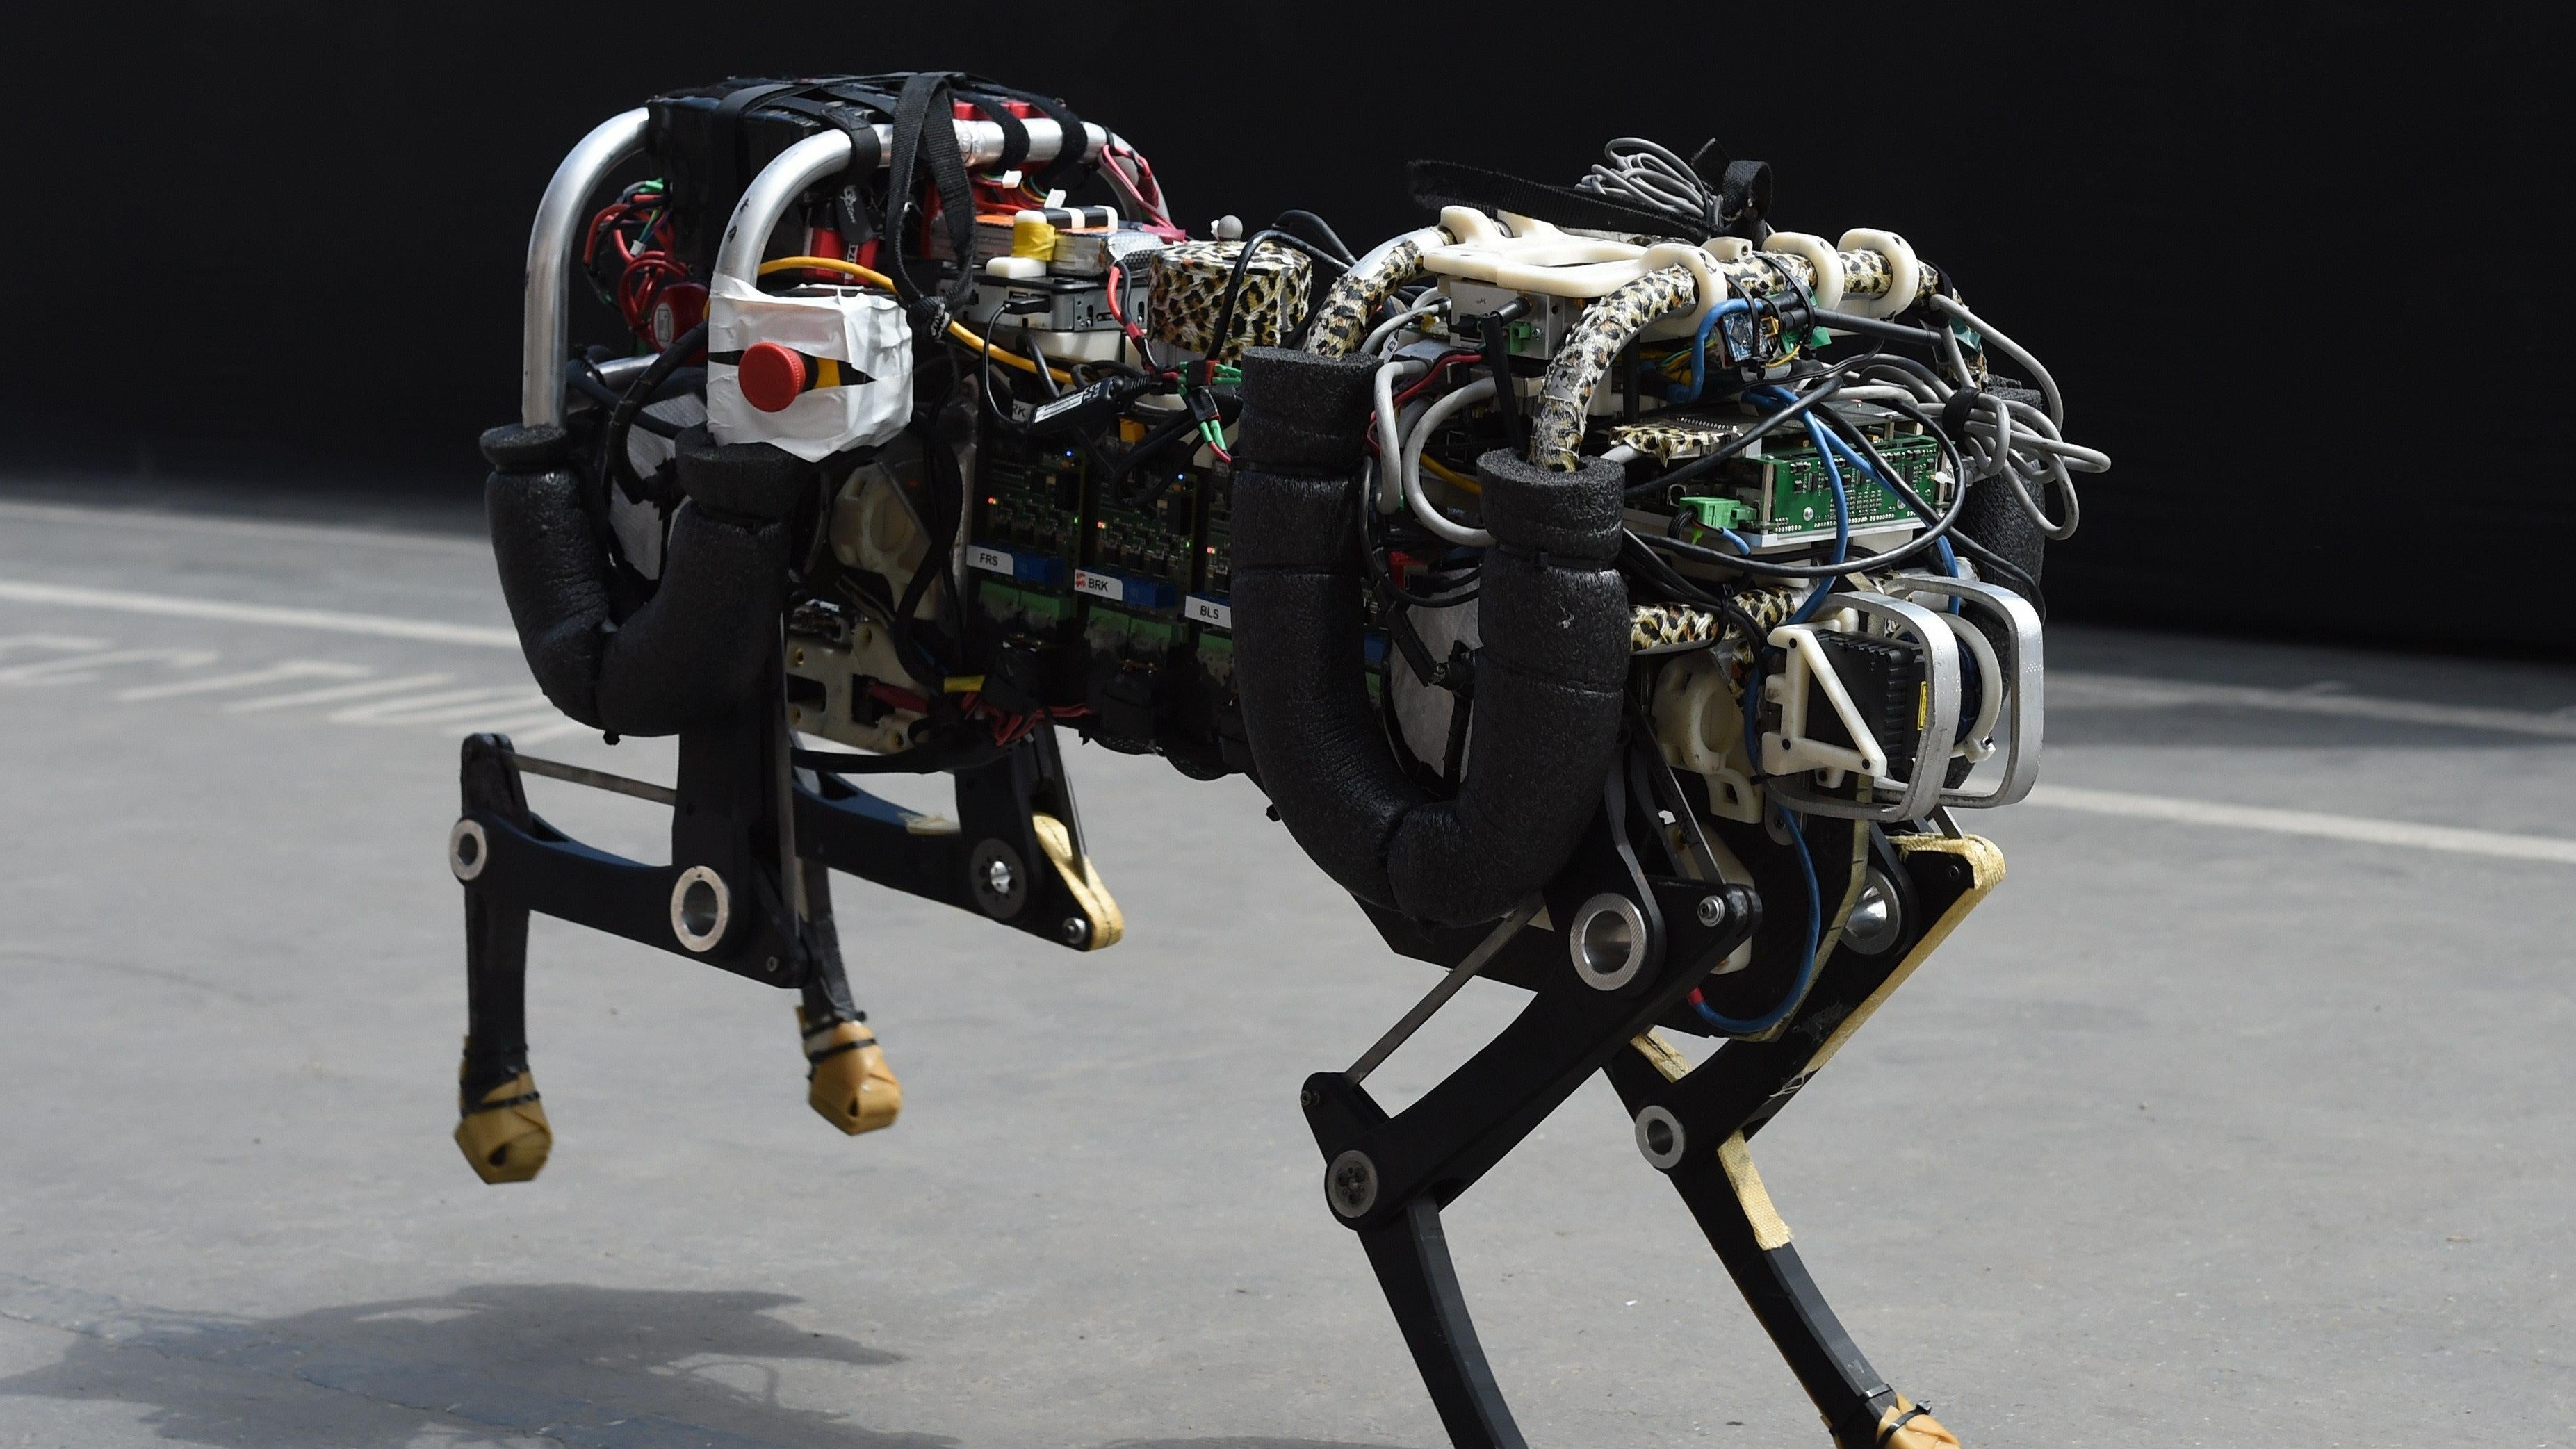 A robotic cheetah runs during a demonstration at the finals of the DARPA Robotics Challenge at the Fairplex complex in Pomona, California on June 6, 2015 (Photo: Mark Ralson, Getty Images)